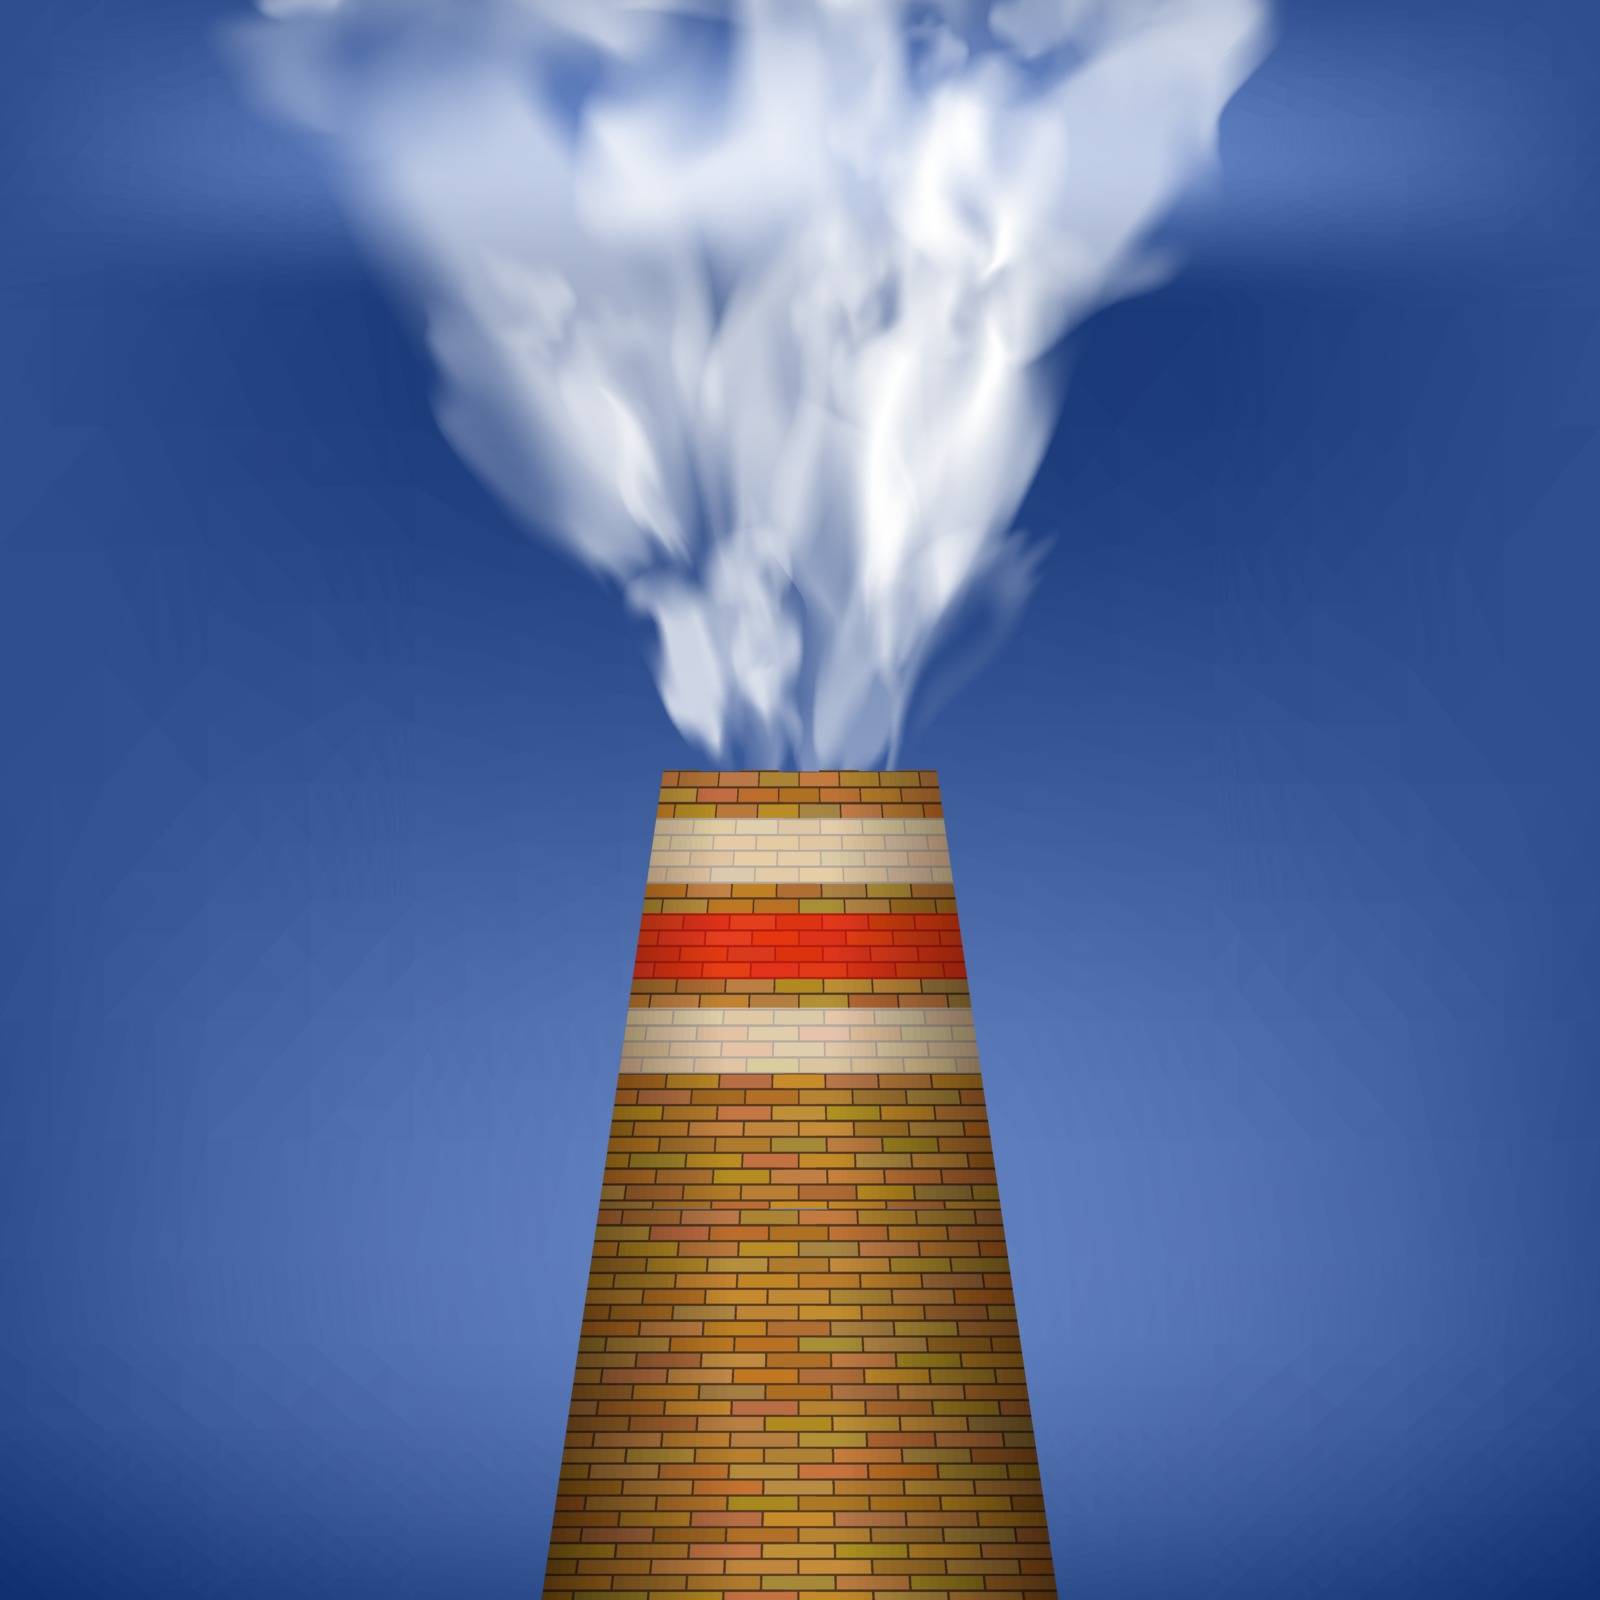 Factory Chimney and Smoke on Blue Background. Environmental Pollution by valeo5